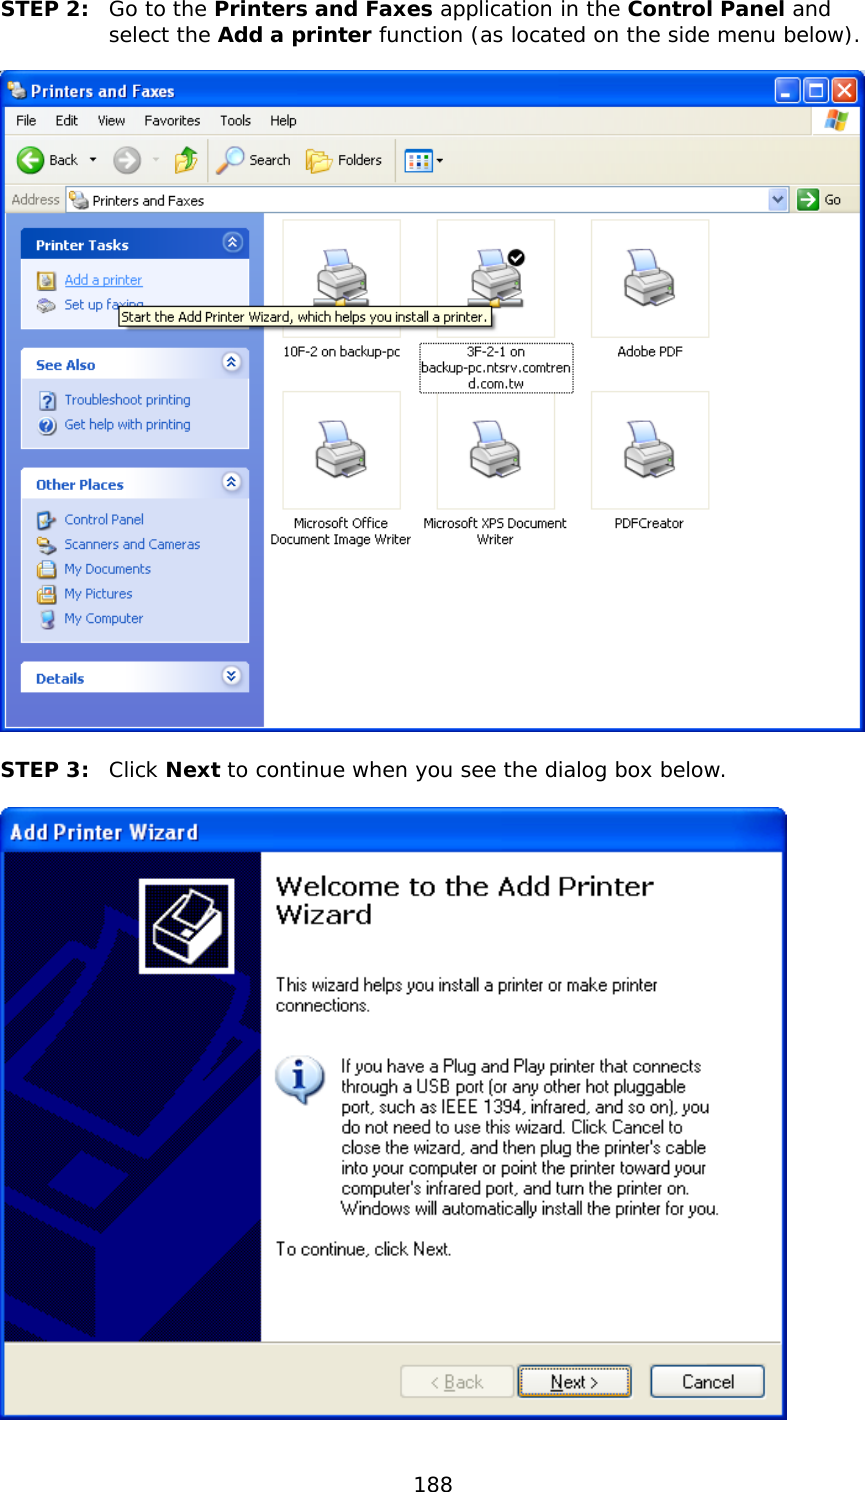  188 STEP 2:  Go to the Printers and Faxes application in the Control Panel and select the Add a printer function (as located on the side menu below).    STEP 3: Click Next to continue when you see the dialog box below.    